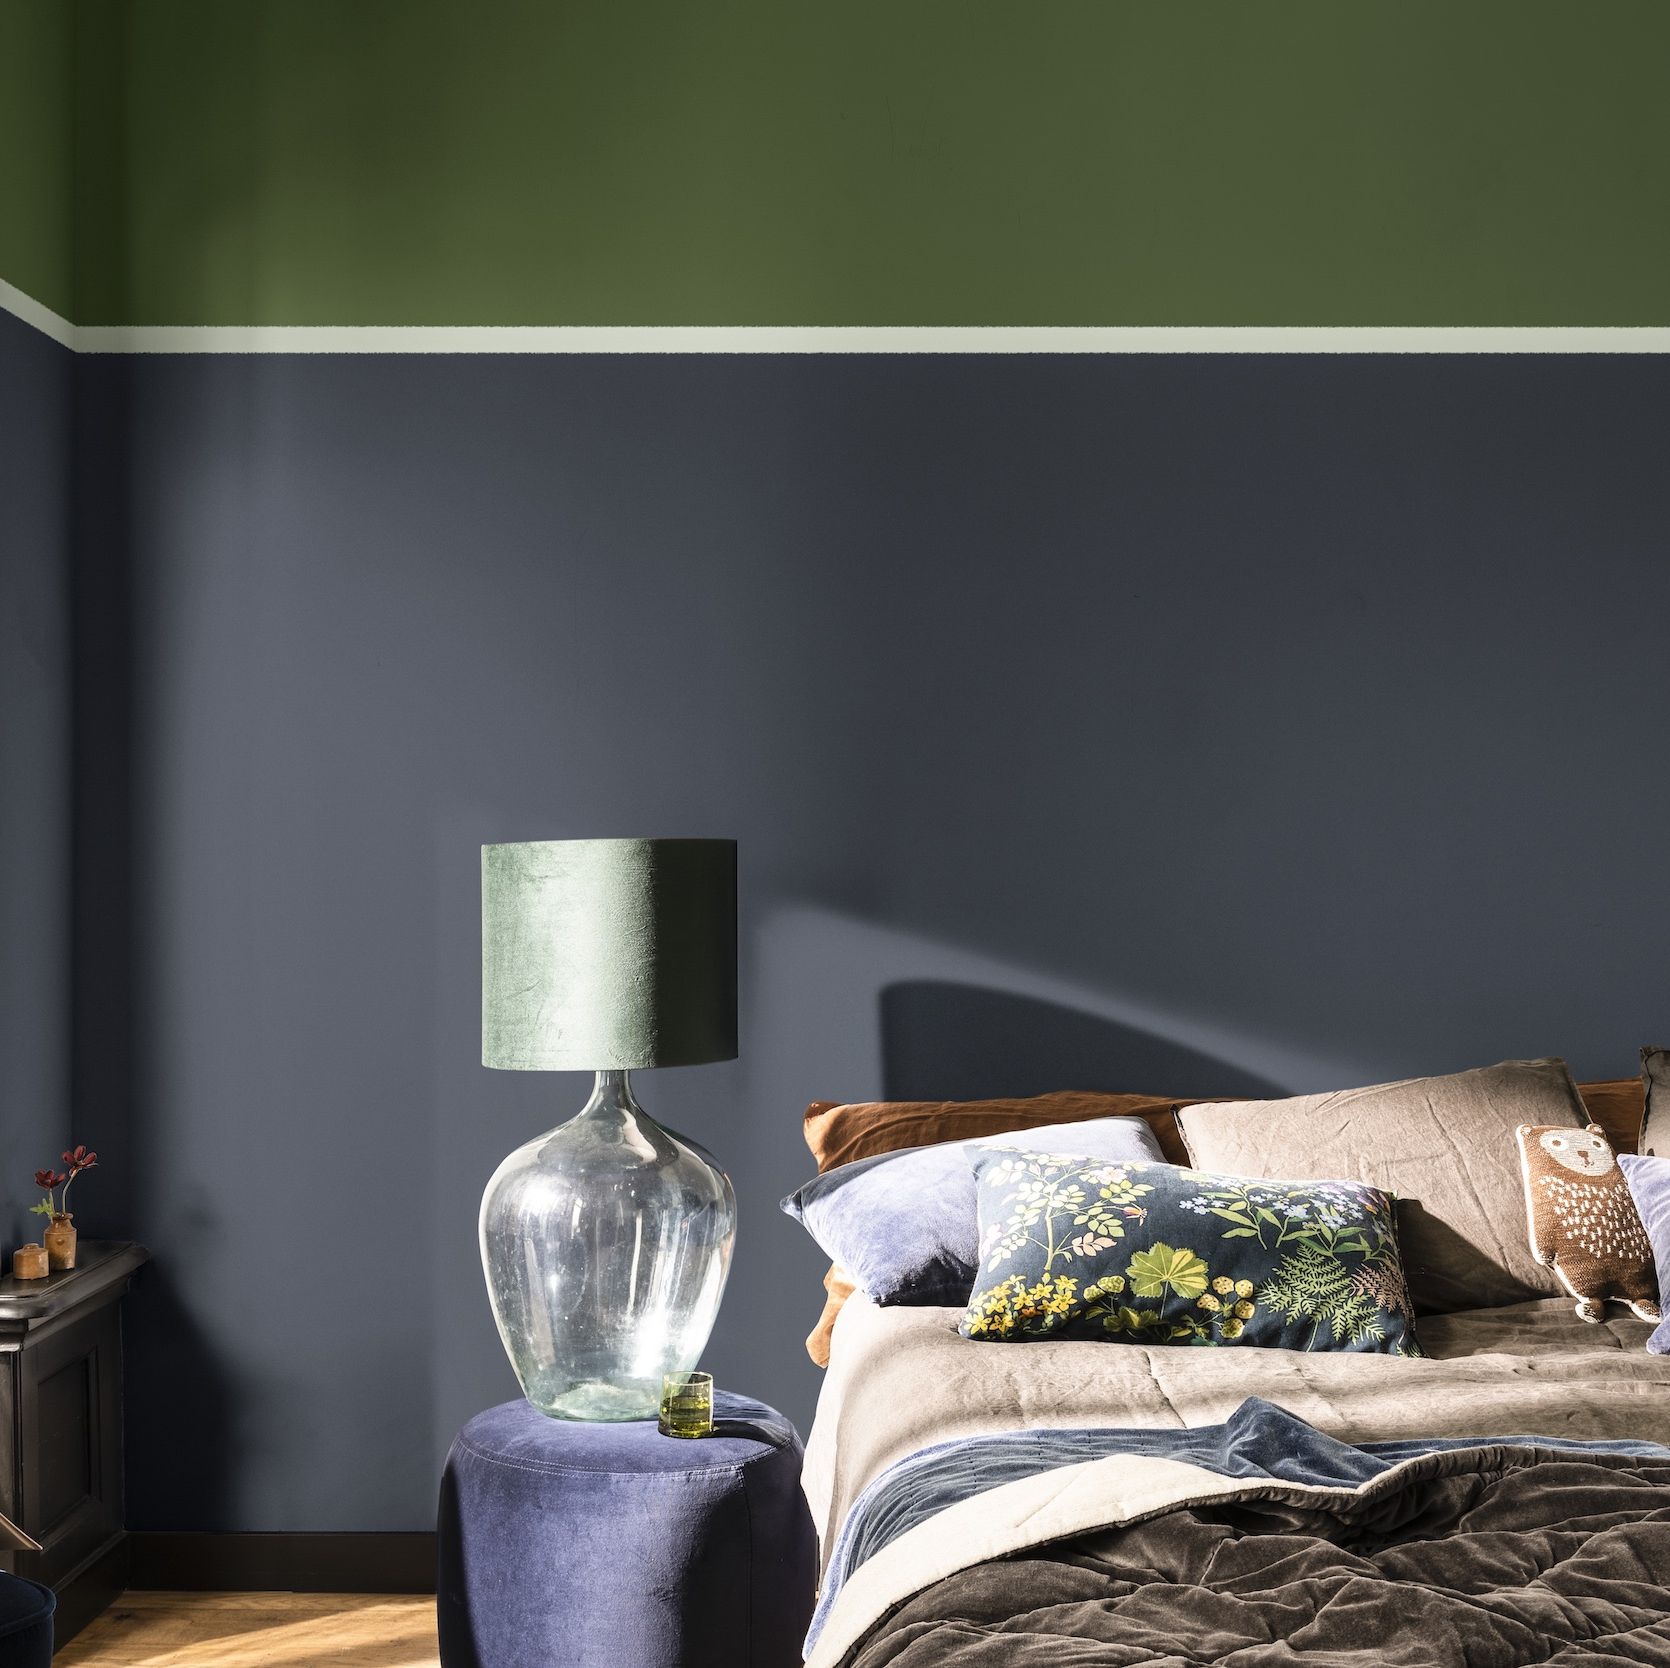 https://hips.hearstapps.com/hmg-prod/images/dulux-colour-of-the-year-2020-tranquil-dawn-creativity-palette-1581297967.jpg?crop=0.668xw:1.00xh;0.0374xw,0&resize=2048:*